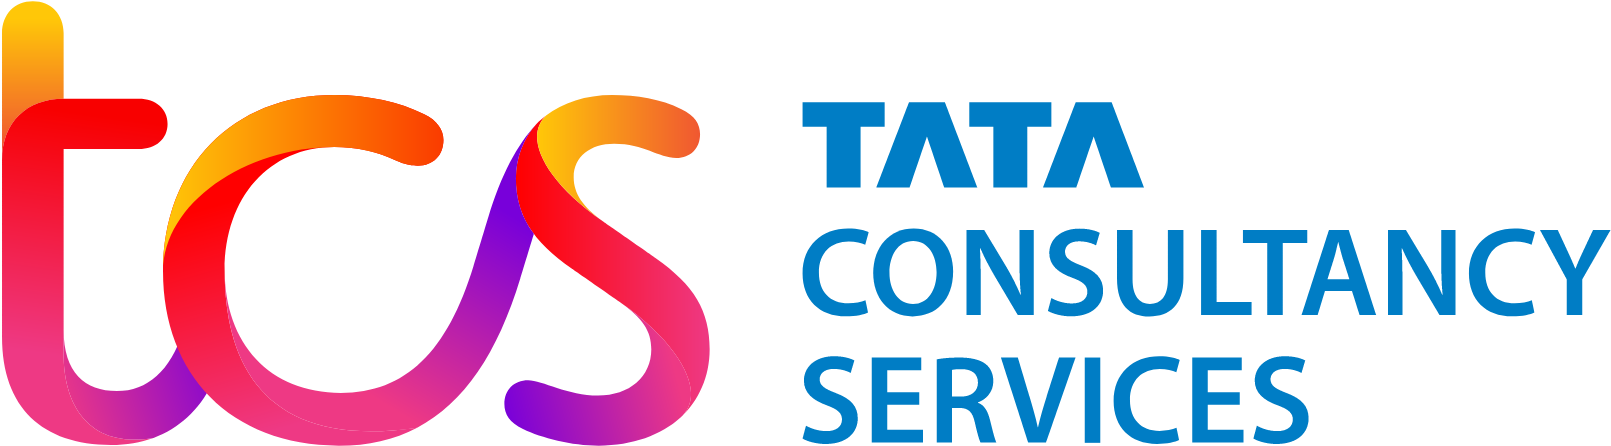 TCS uses space tech in BFSI sector